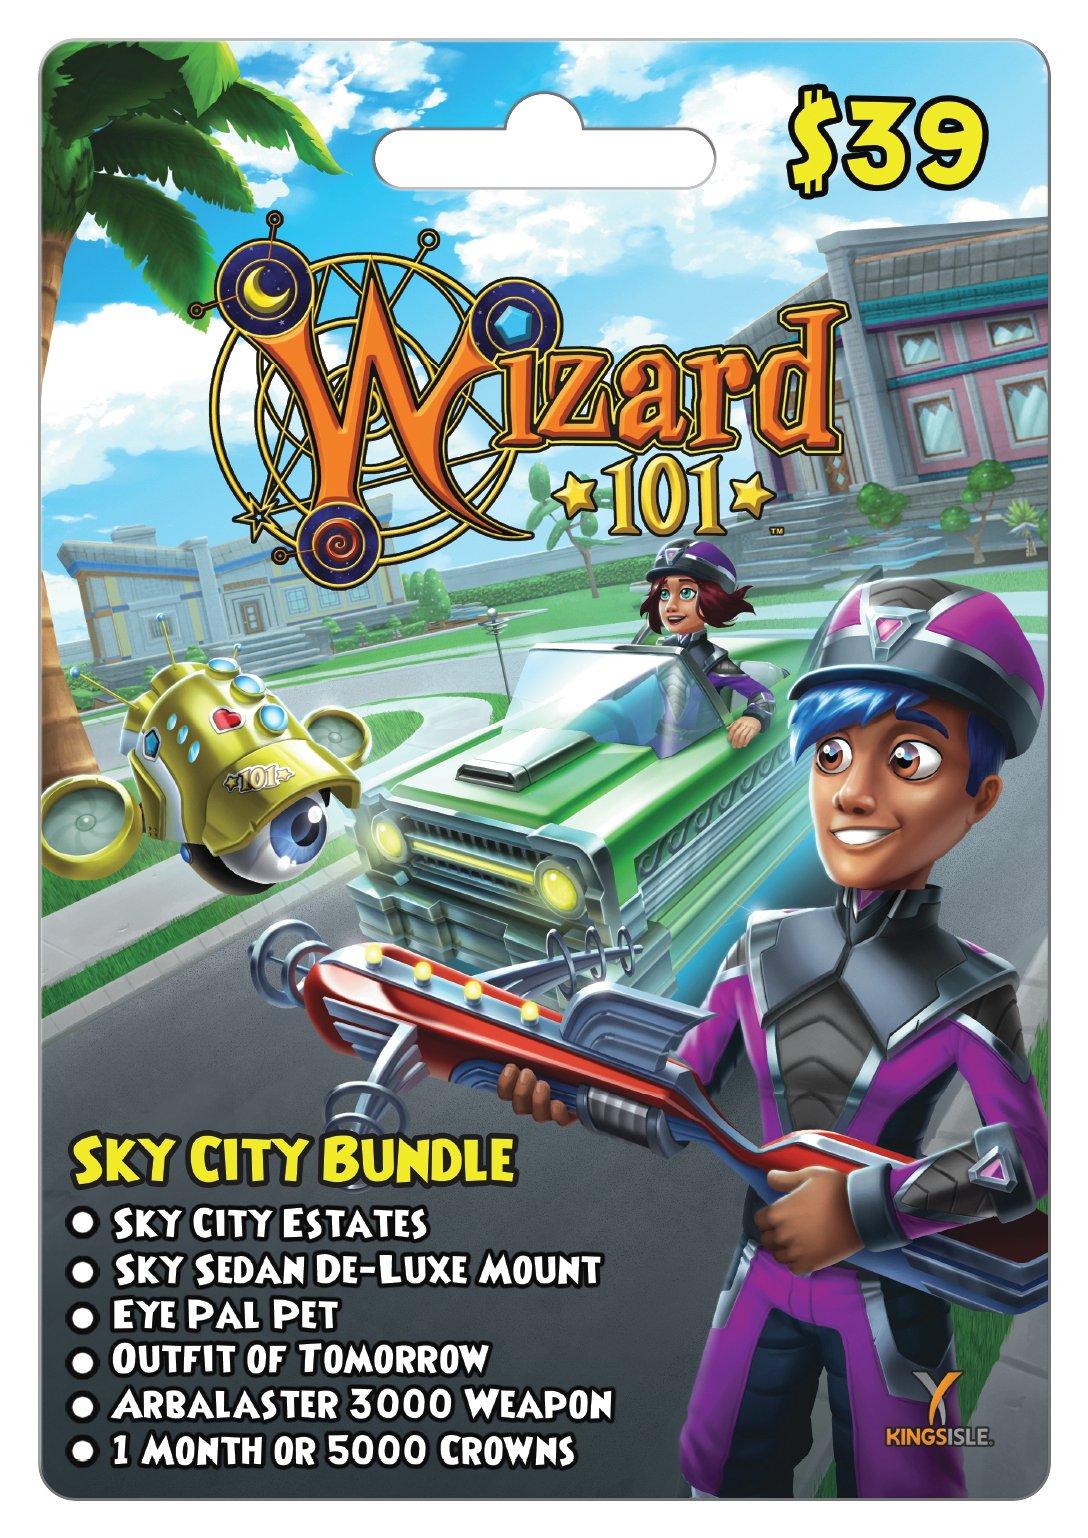 With wizard 101 coming to Xbox and Mobile I'd love to see a bundle